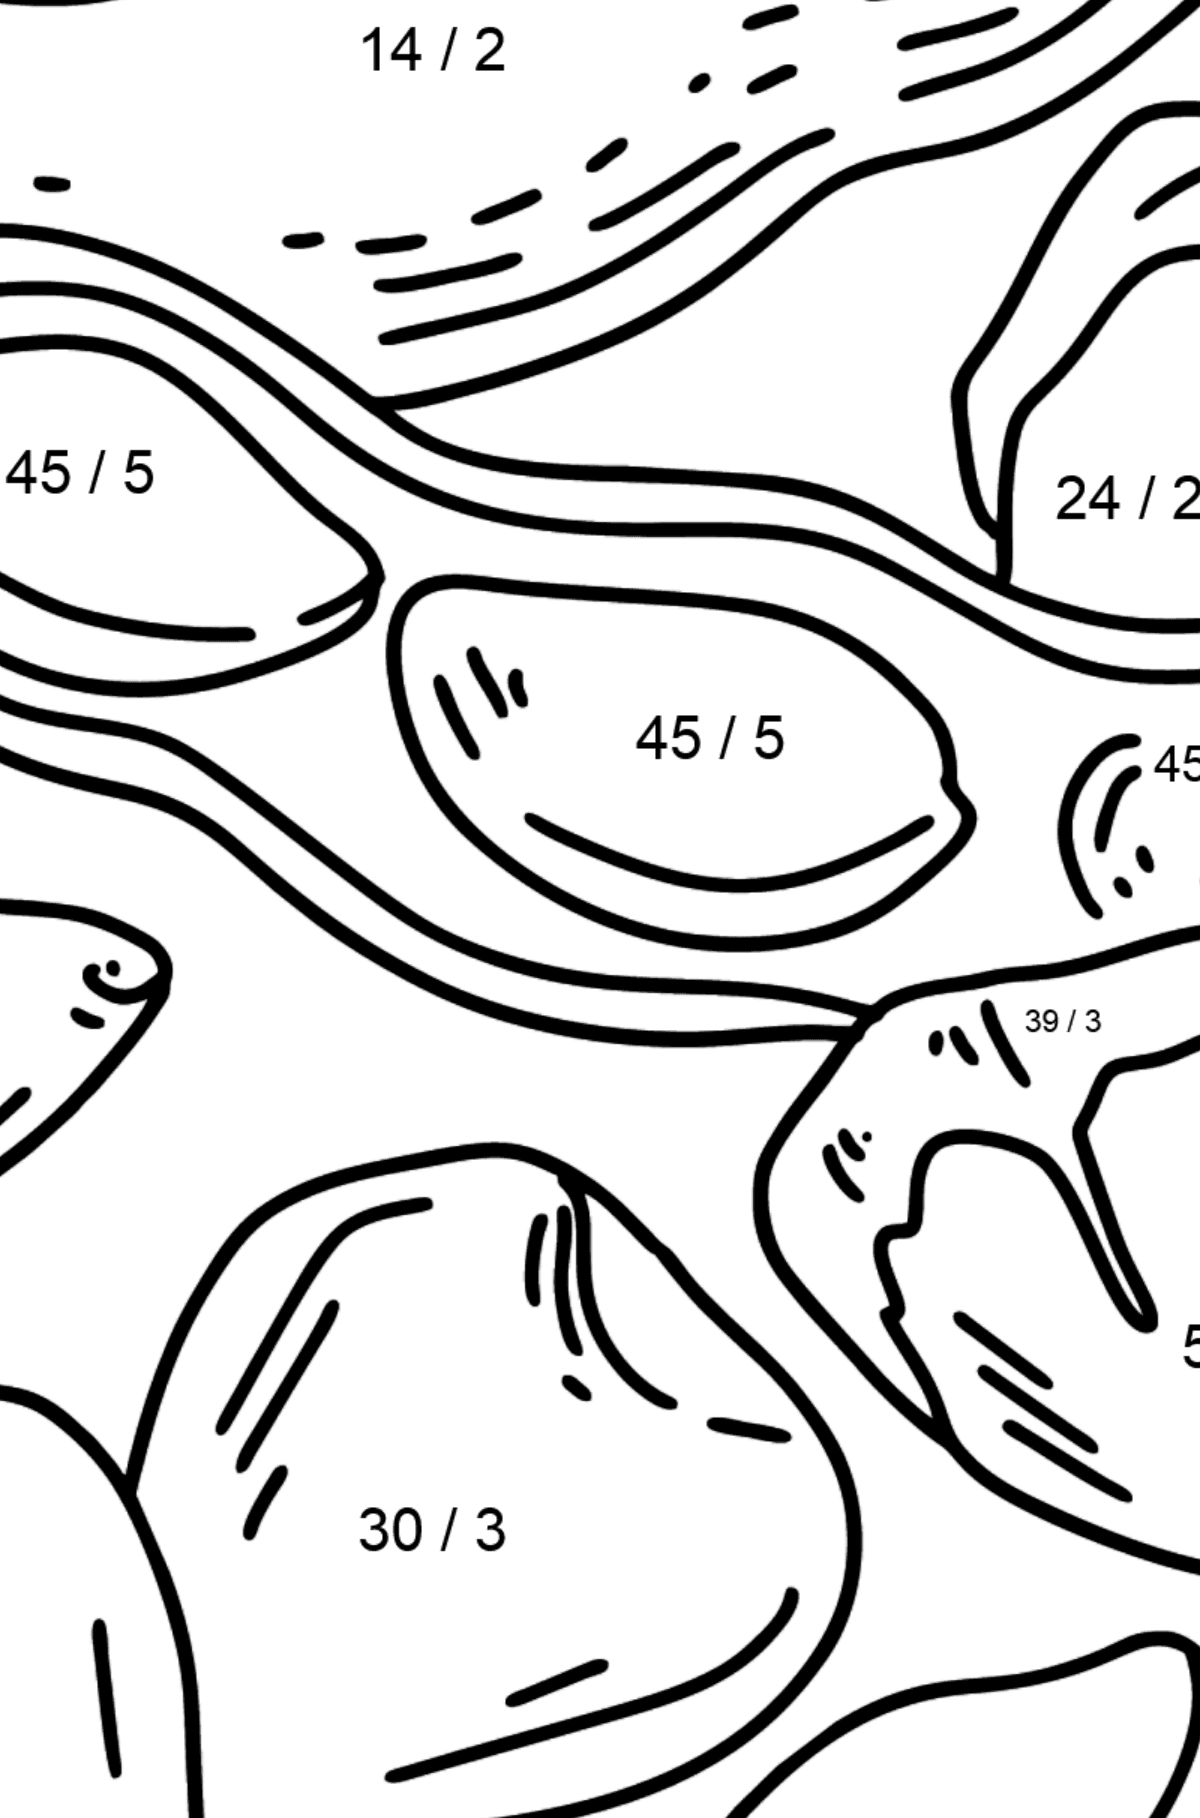 Nuts - Peanuts and Hazelnuts coloring page - Math Coloring - Division for Kids